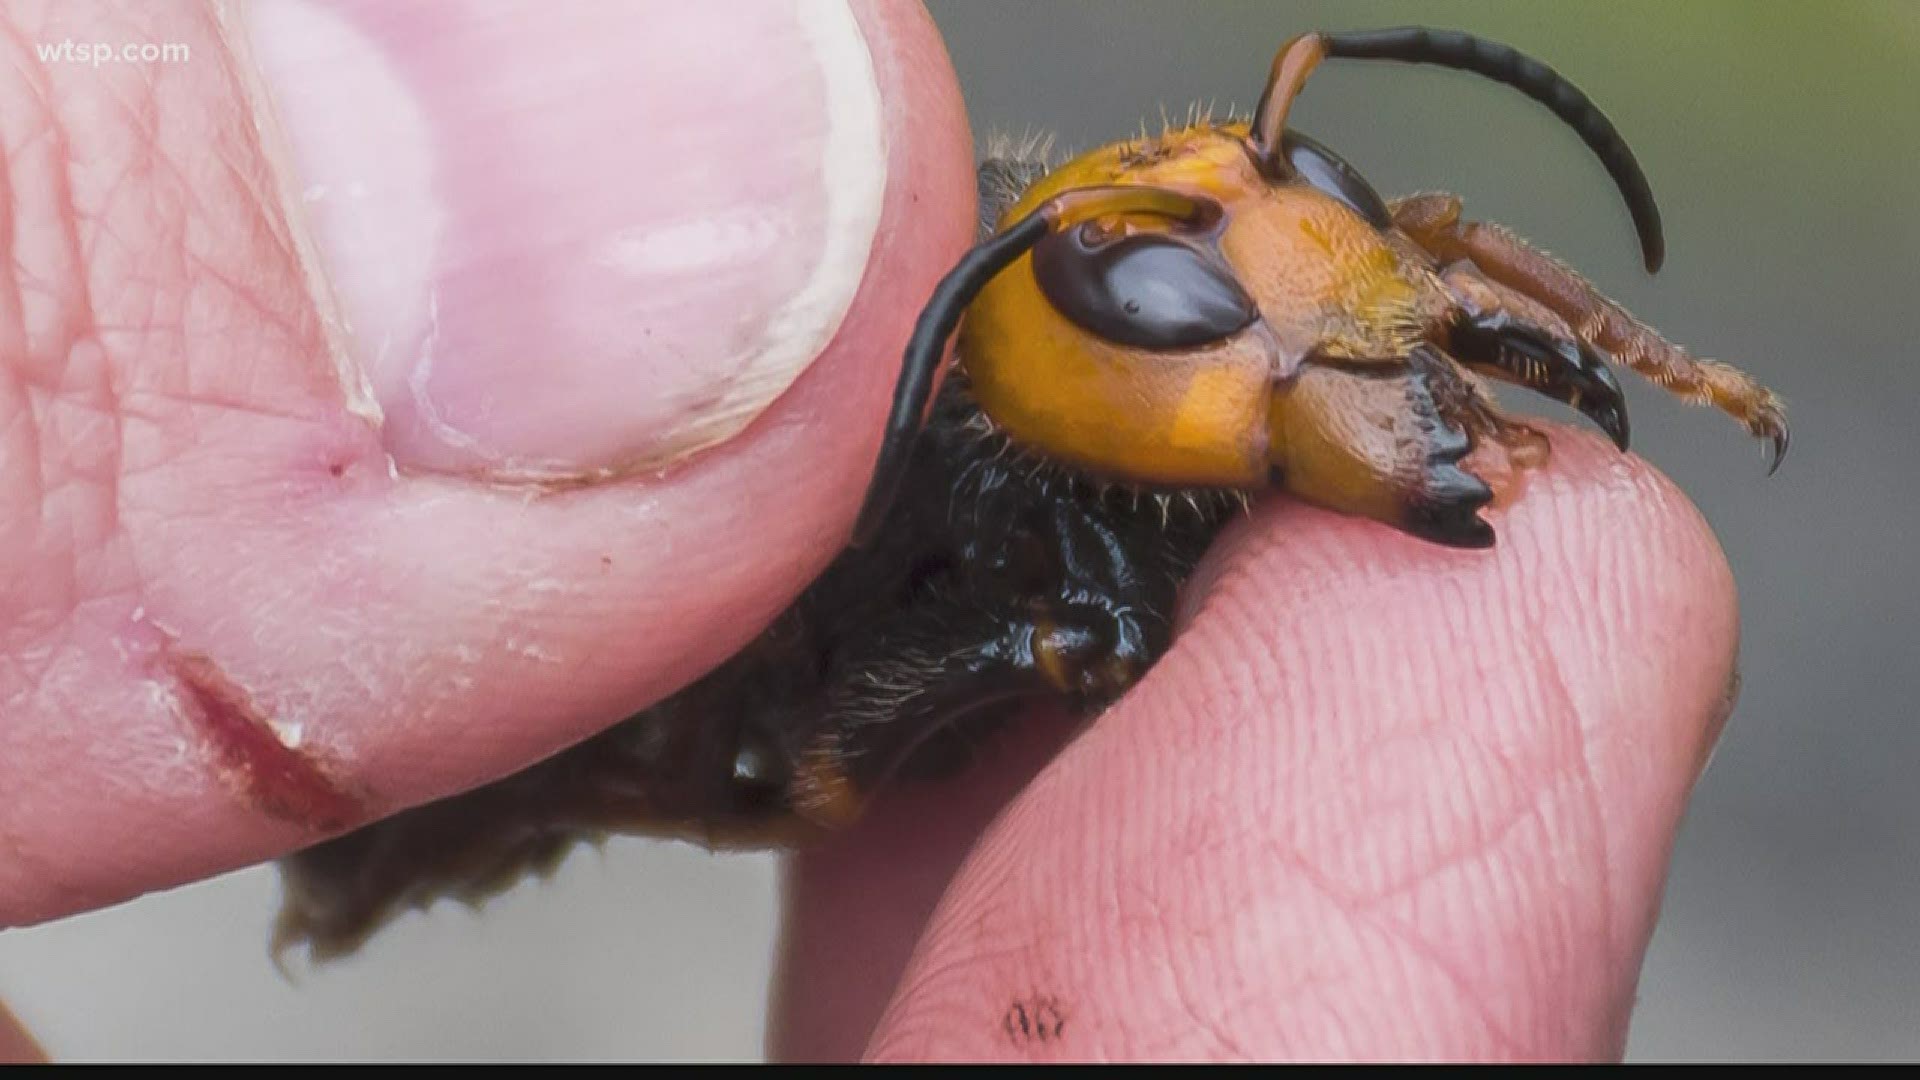 Experts say the chances of giant Asian hornets coming to Florida are slim.